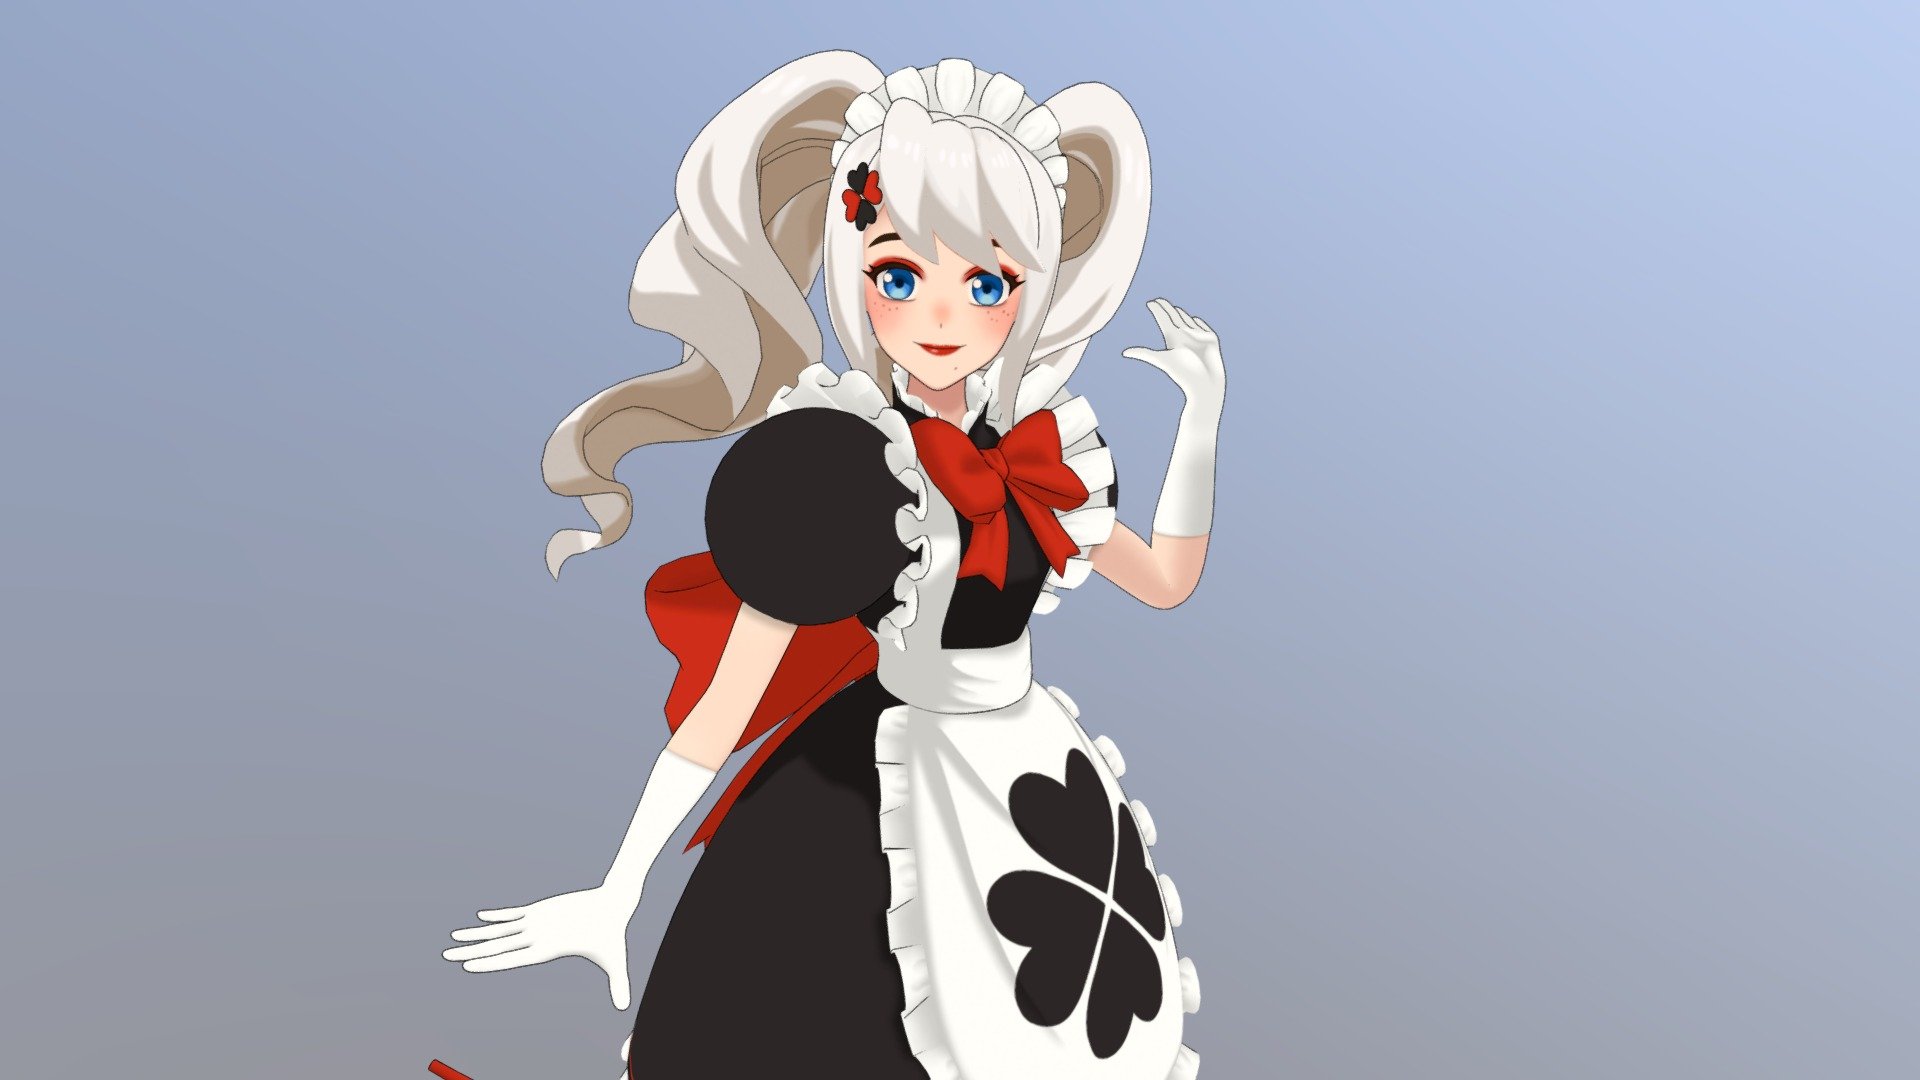 A great commission for @Maid_Cloverly I had the pleasure to work on!

Fully rigged for VRChat and with 10 different espressions


She also has a different hairstyle and face textures
 - Clover Maid (Commission - VRChat) - 3D model by Ichla3D • (COMMISSIONS OPEN) (@ichla3d) 3d model